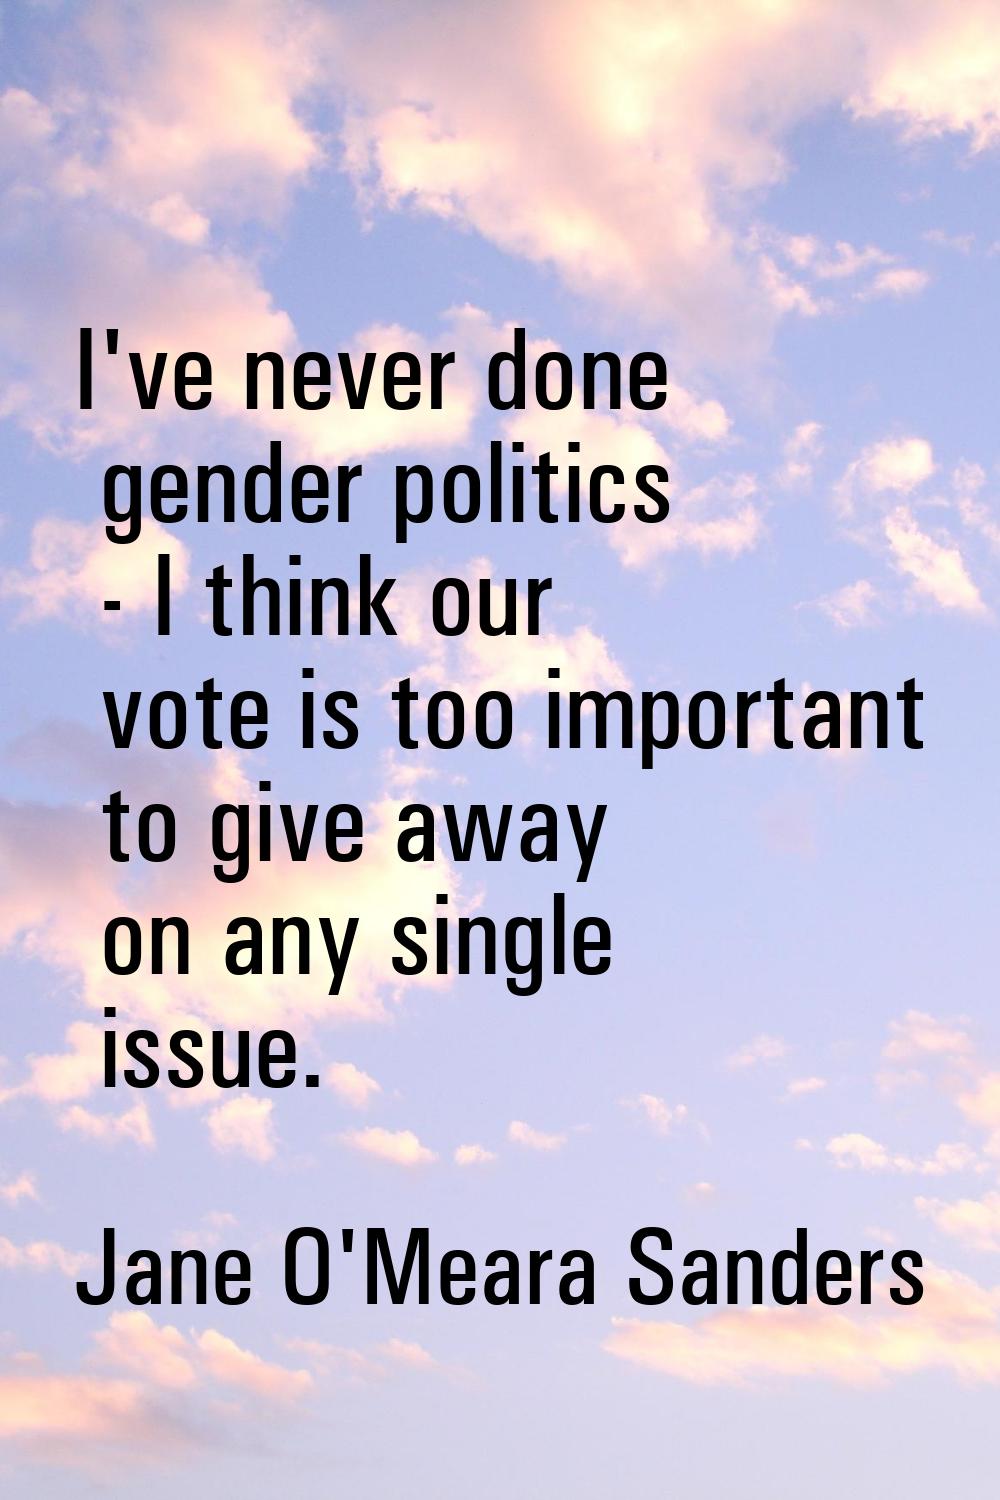 I've never done gender politics - I think our vote is too important to give away on any single issu